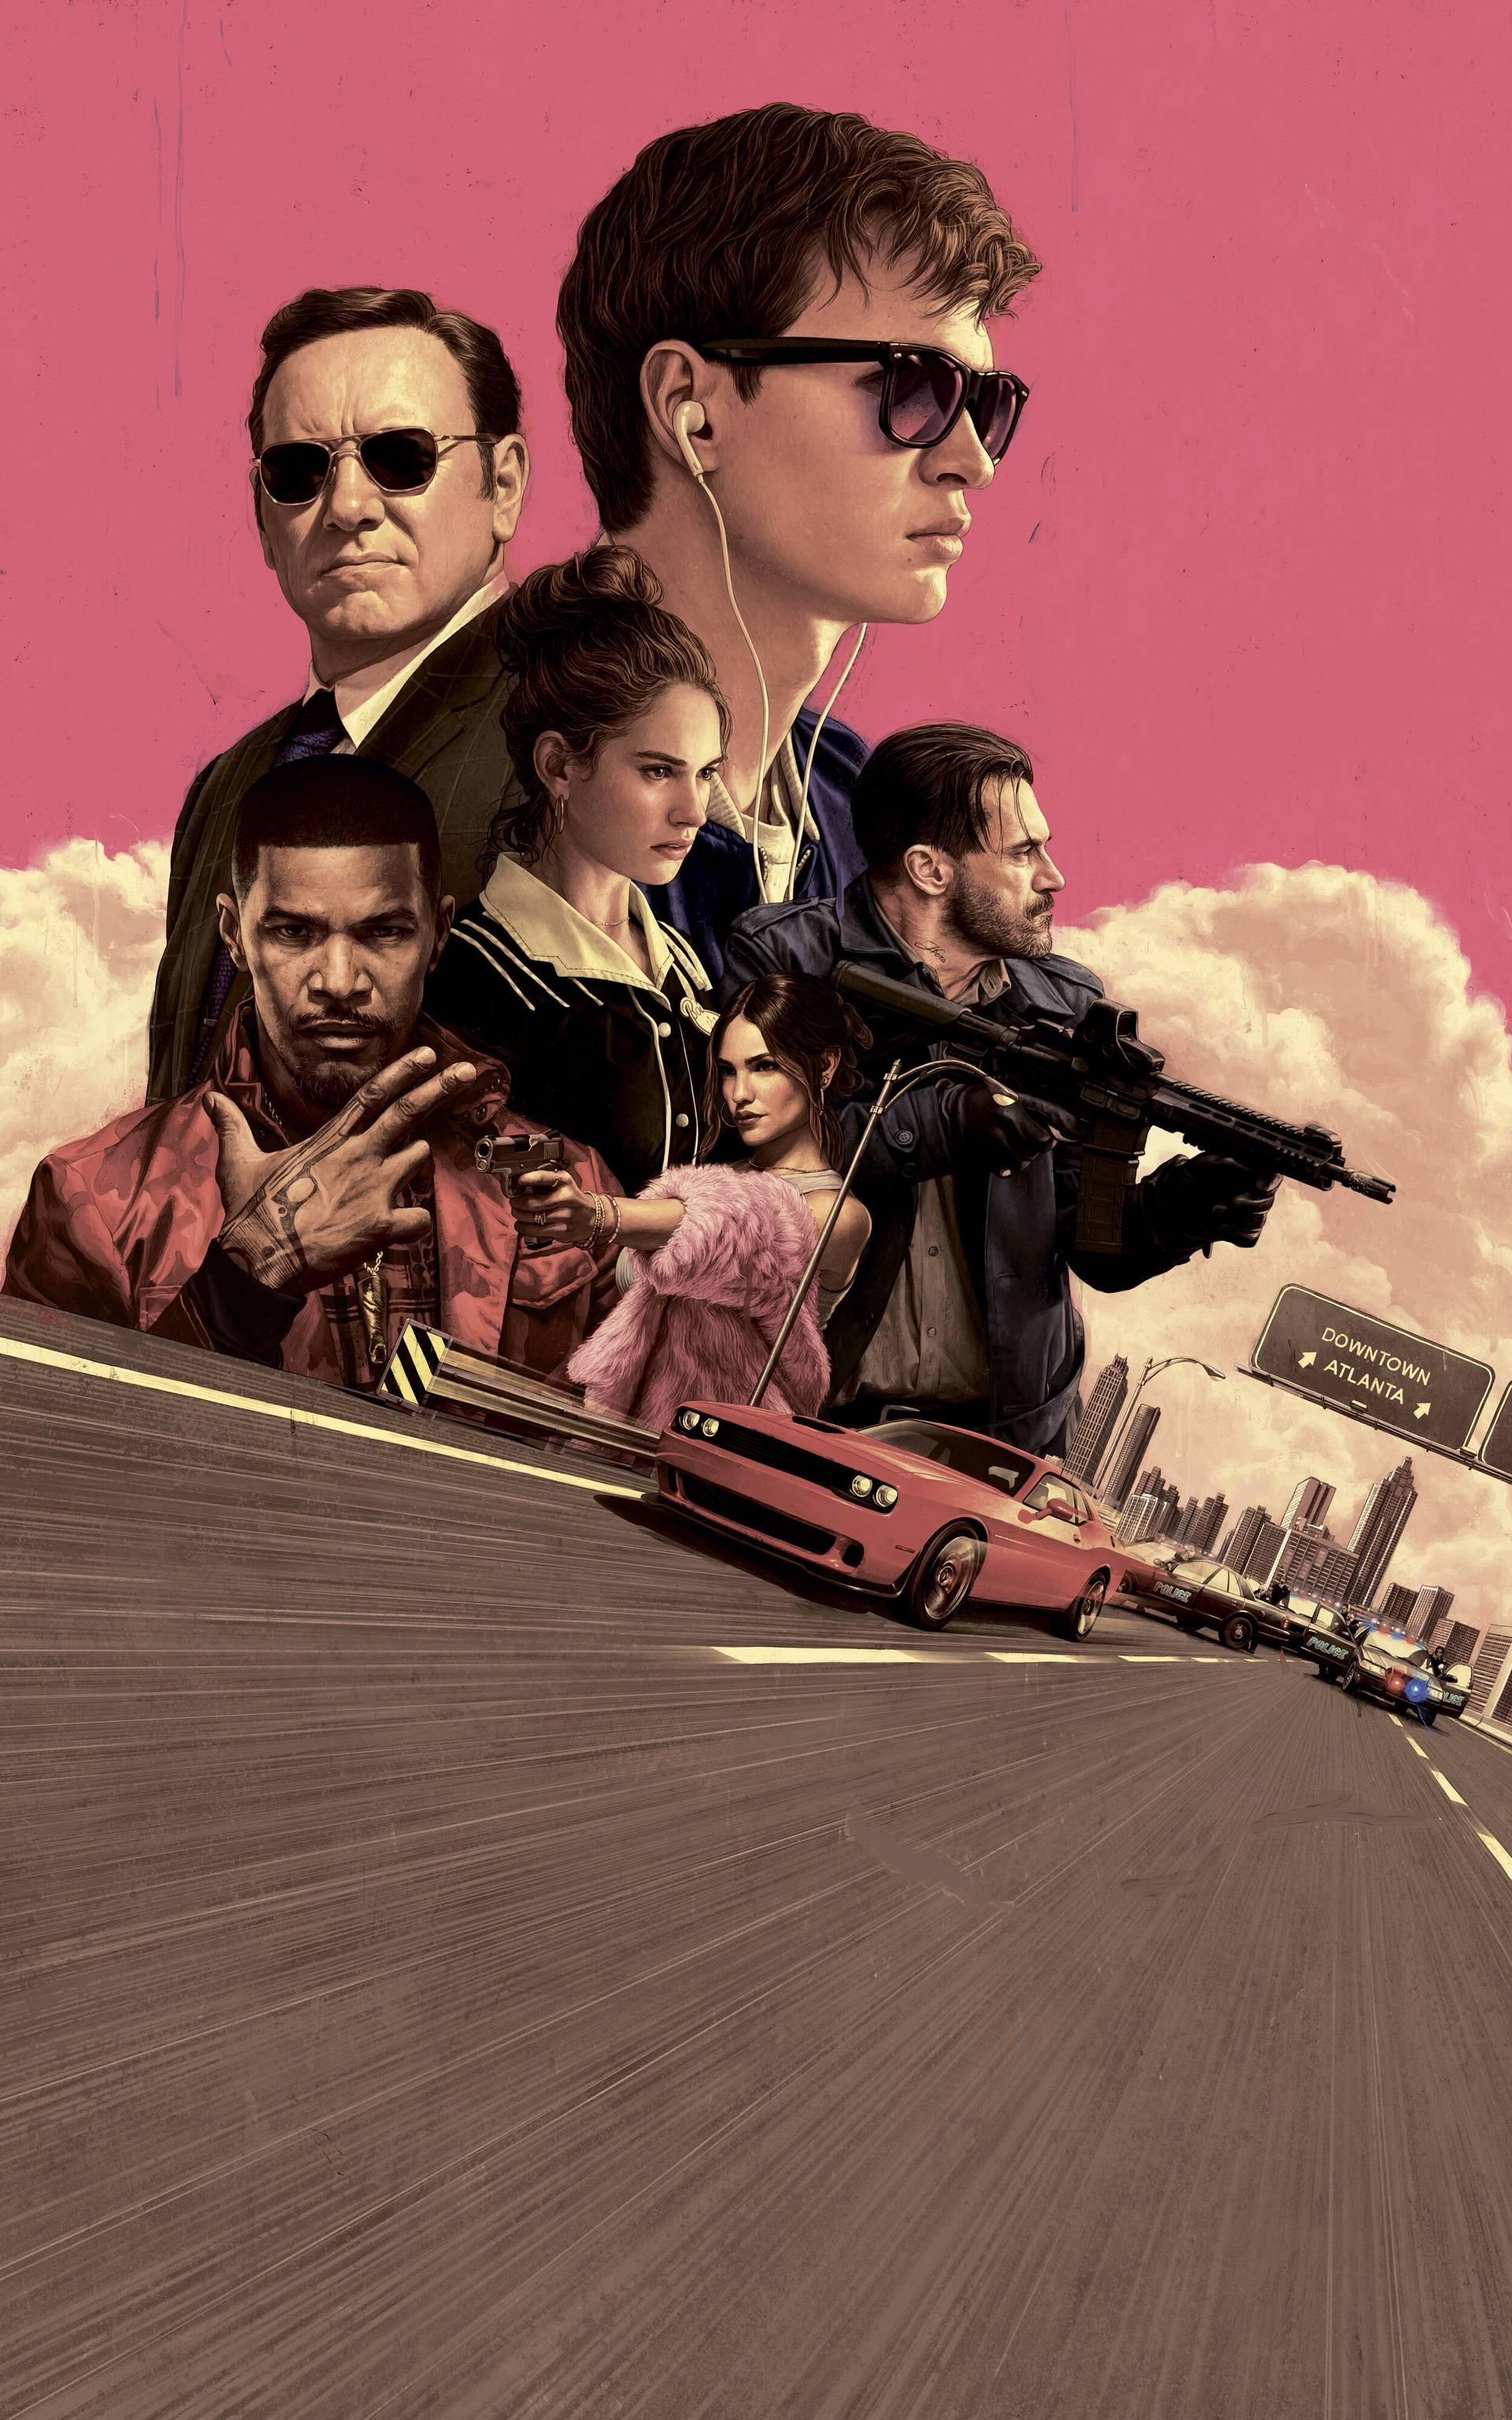 Baby driver wallpaper for anyone a fan of the movie